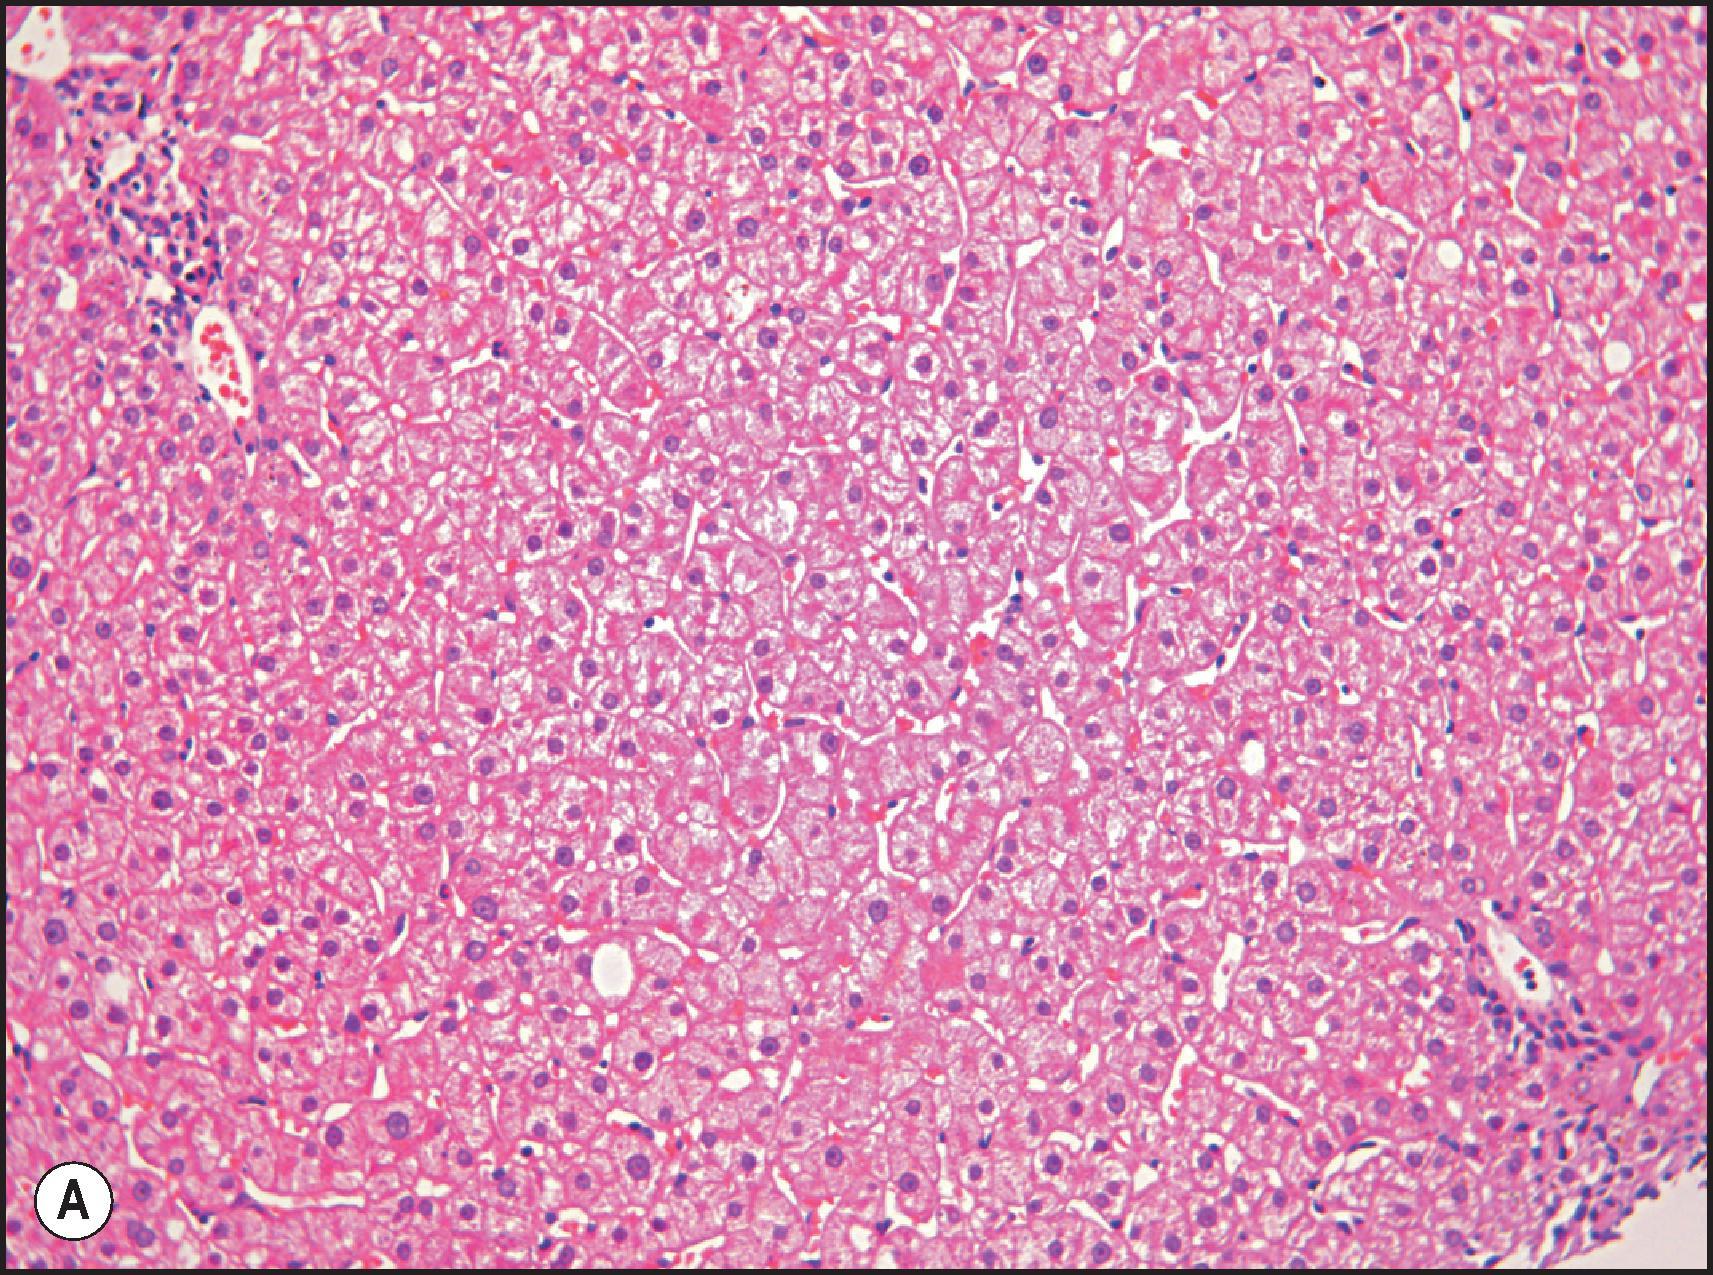 Figure 4.4, Male of 38 years with deranged liver function tests. He was subsequently identified as homozygous for the C282Y mutation on the basis of the biopsy finding. (A) Liver biopsy is histologically unremarkable on routine staining. (Haematoxylin and eosin [H&E] stain.) (B) However, grade 1 iron deposition is present in periportal hepatocytes. (Perls stain.)